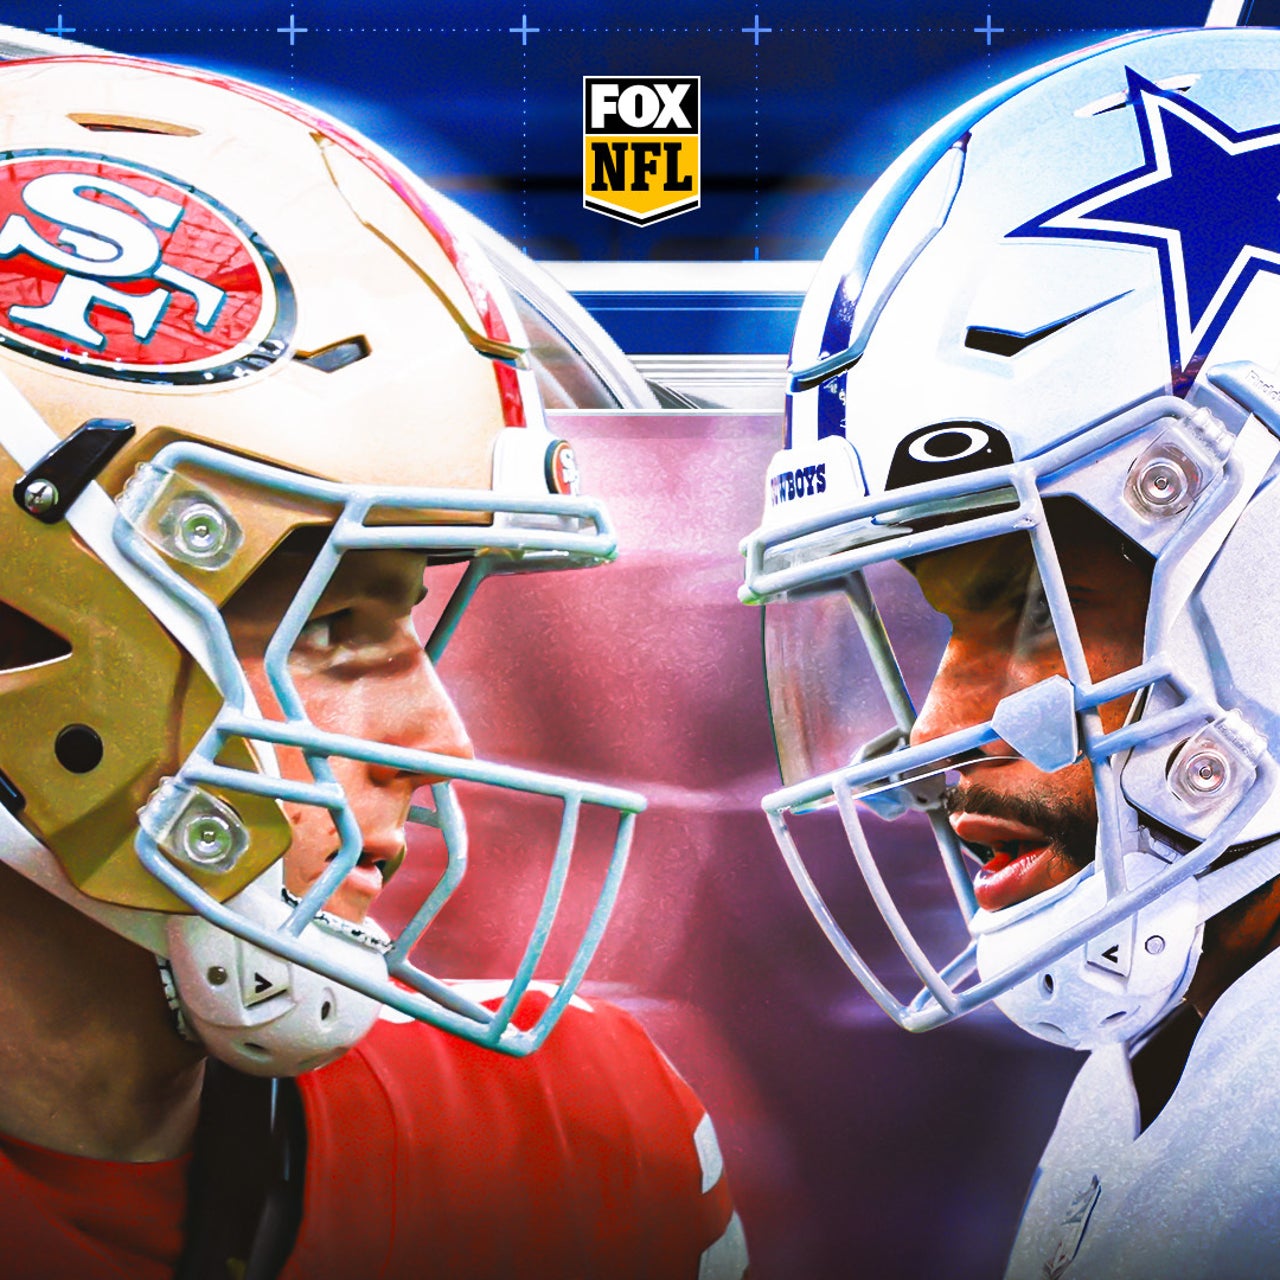 49ers vs. Cowboys prediction: NFL divisional round playoff odds, picks